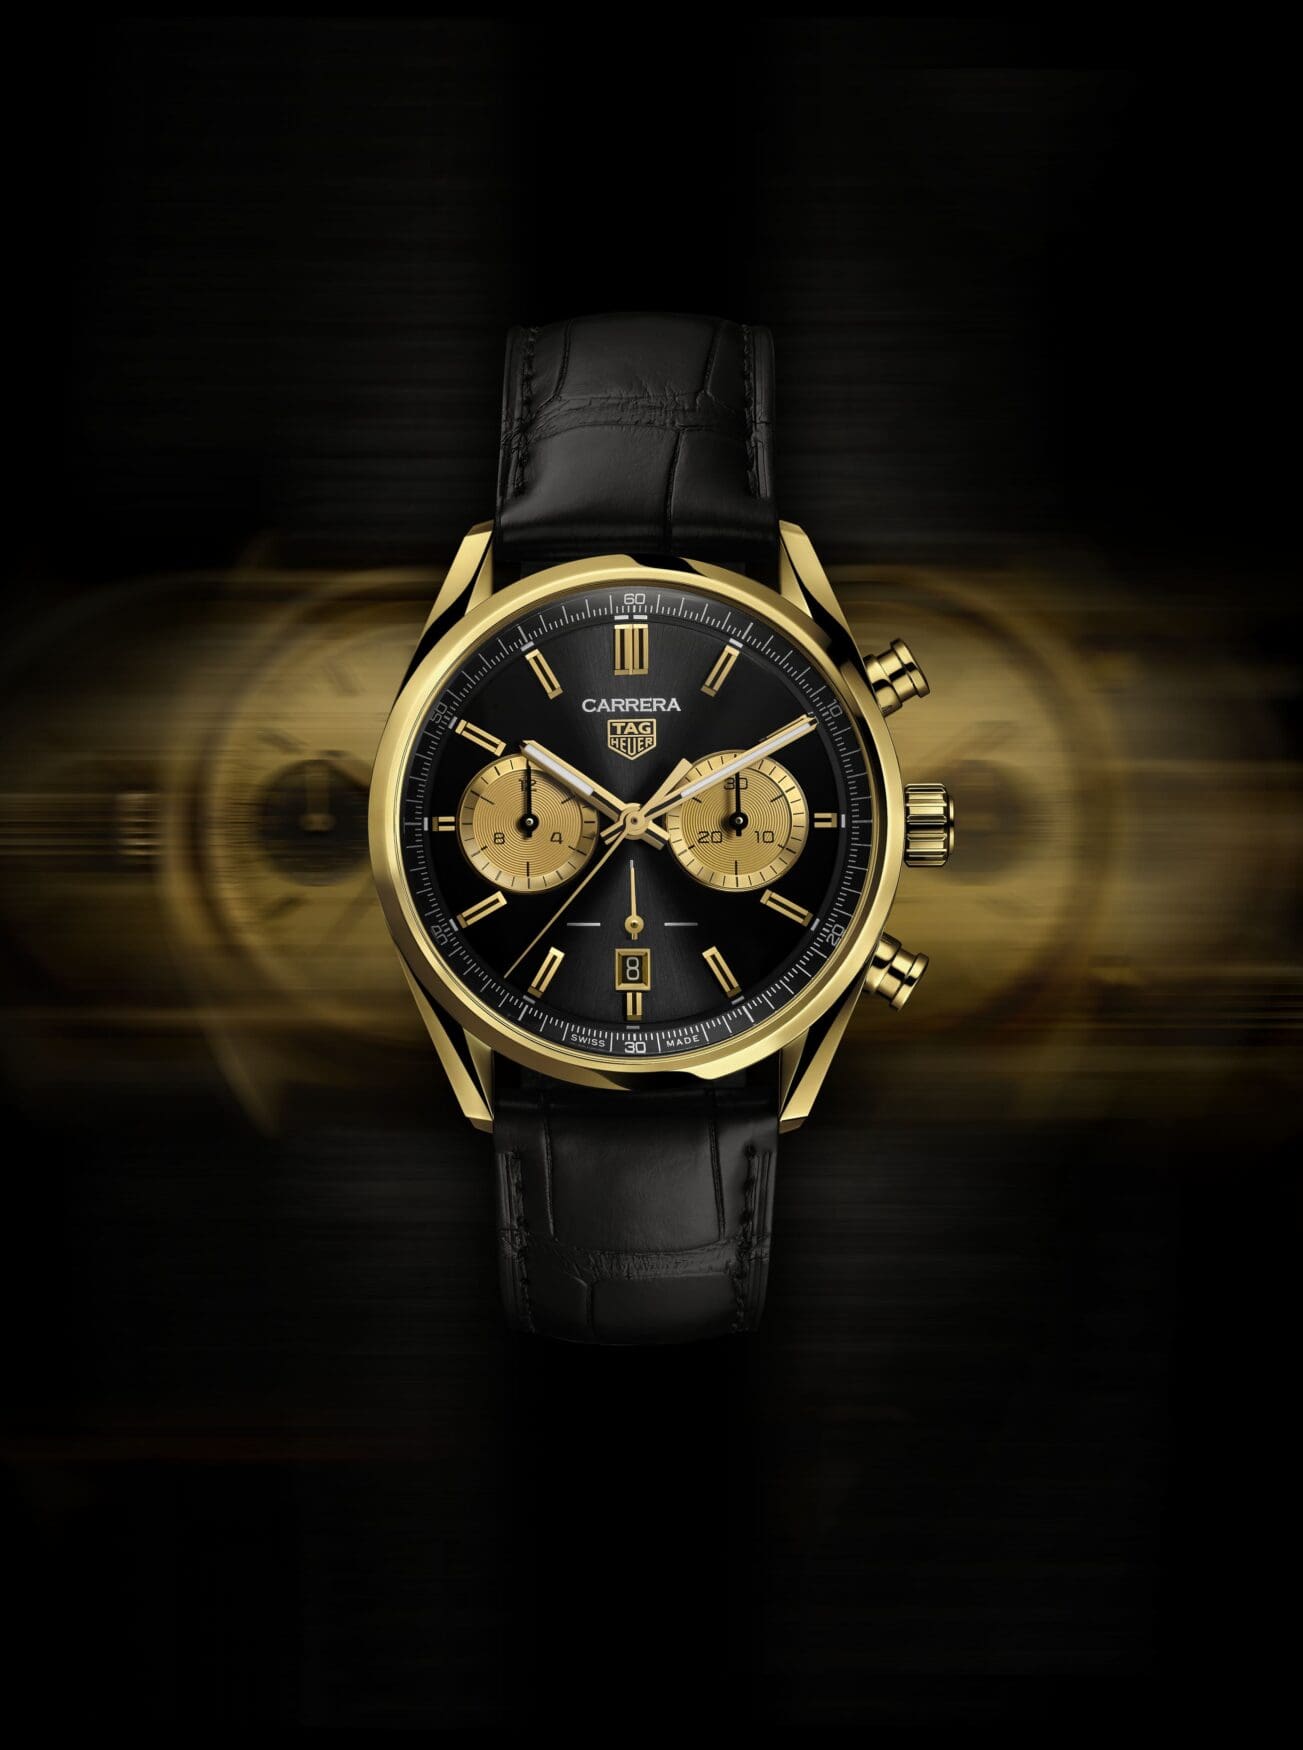 The new TAG Heuer Carrera in yellow gold is a gentleman’s racing chrono